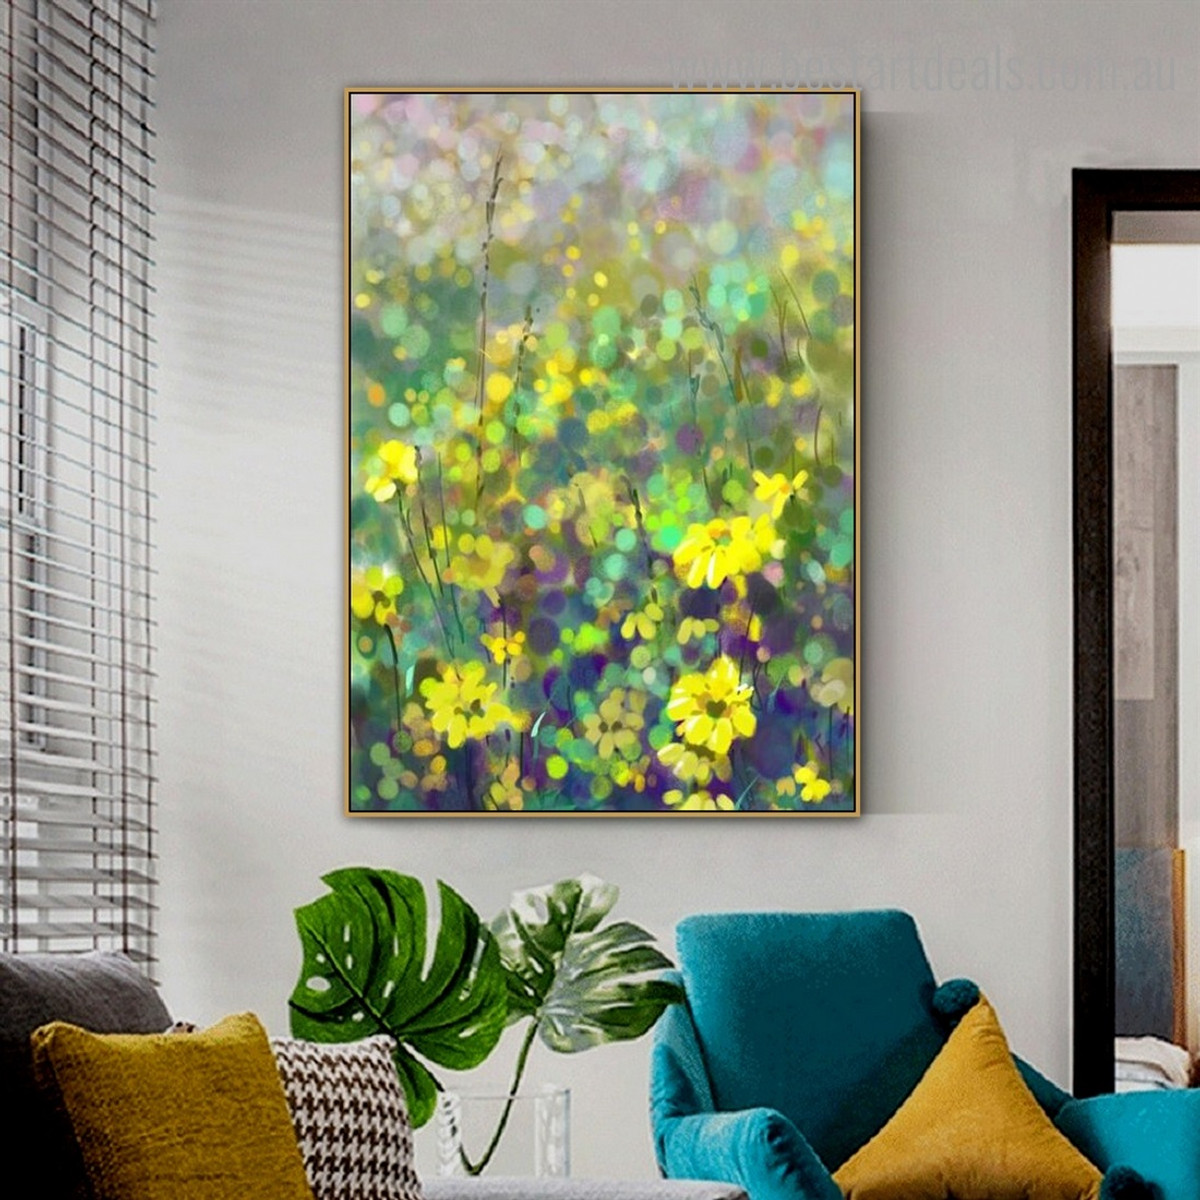 Yellow Floral Garden Abstract Botanical Framed Painting Pic Canvas Print for Room Wall Adornment